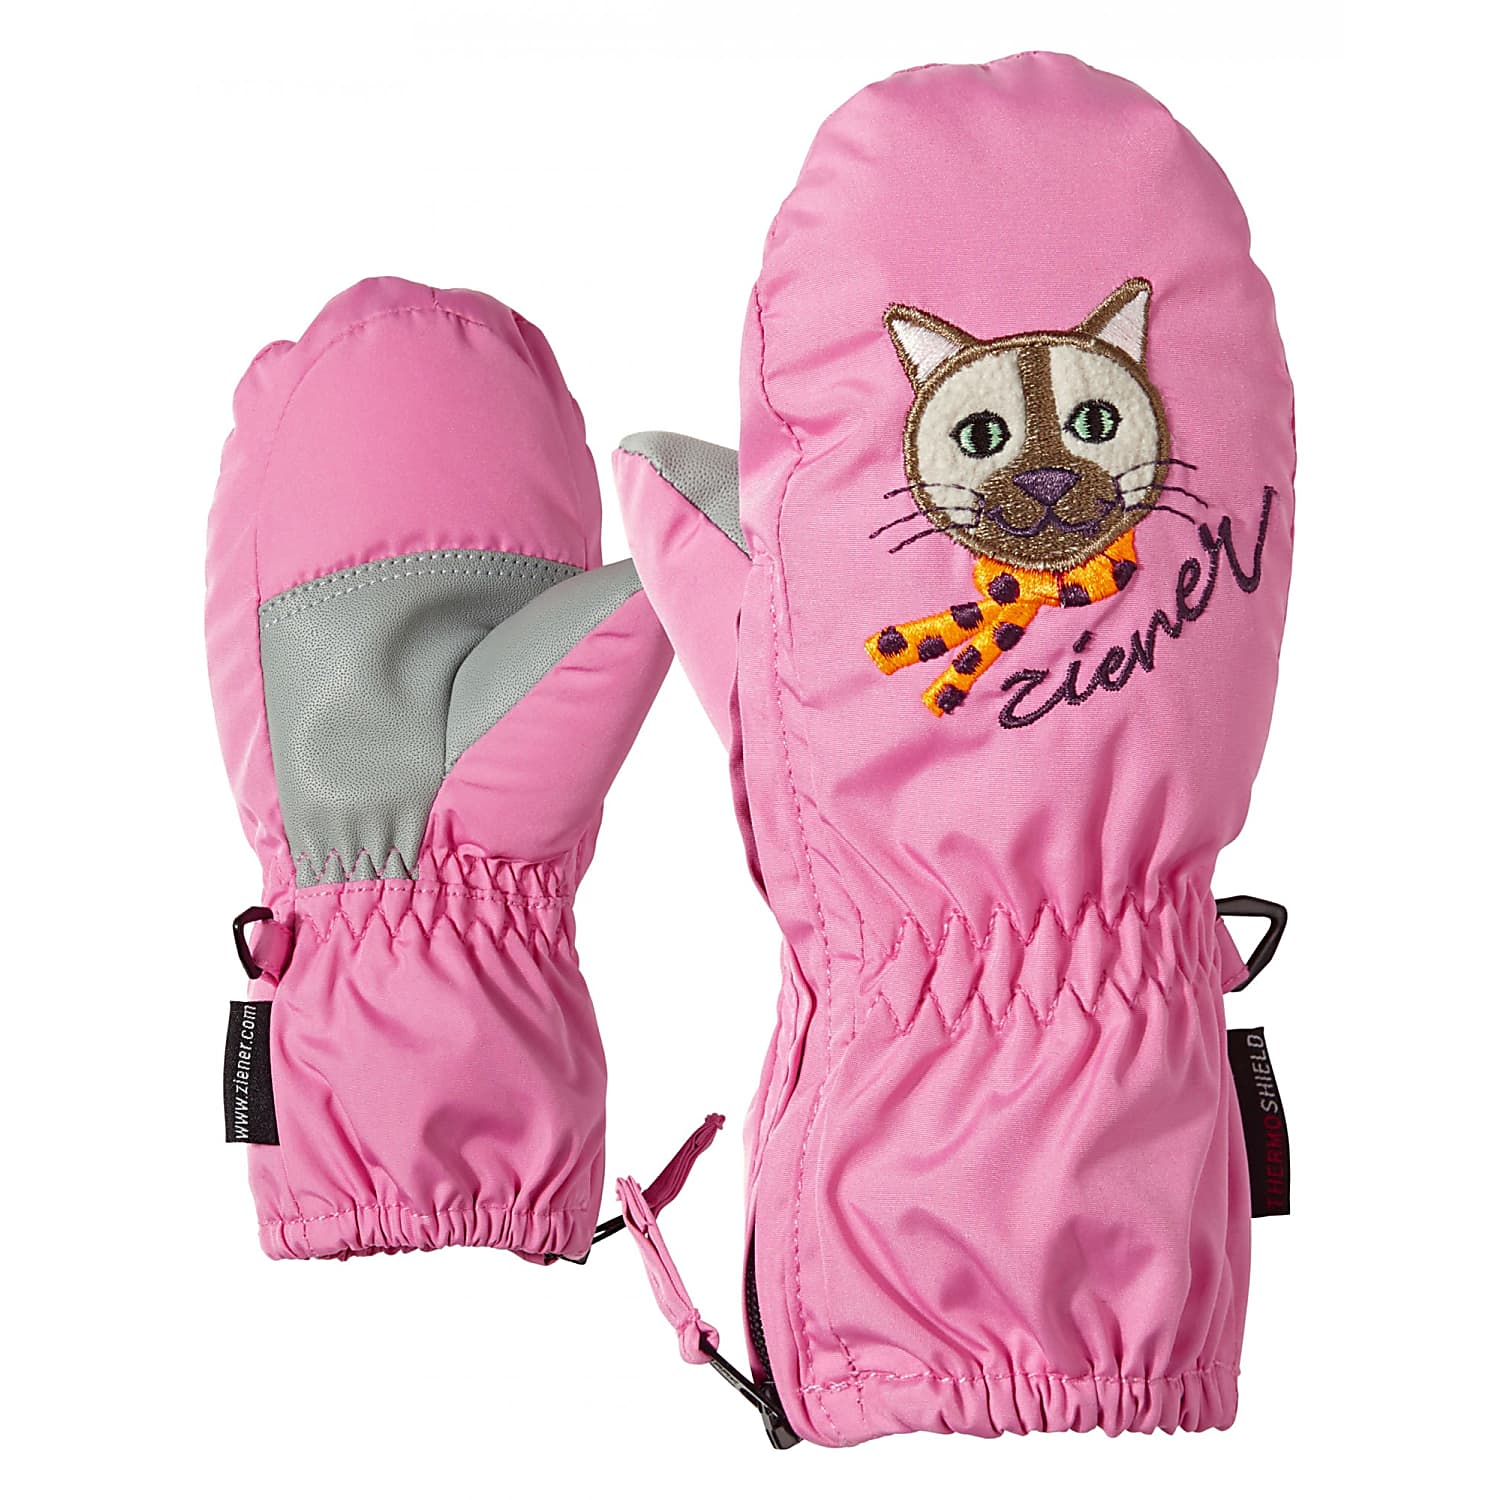 LE Ziener Flamingo - MITTEN, Fast cheap shipping MINIS ZOO and Pink TODDLER